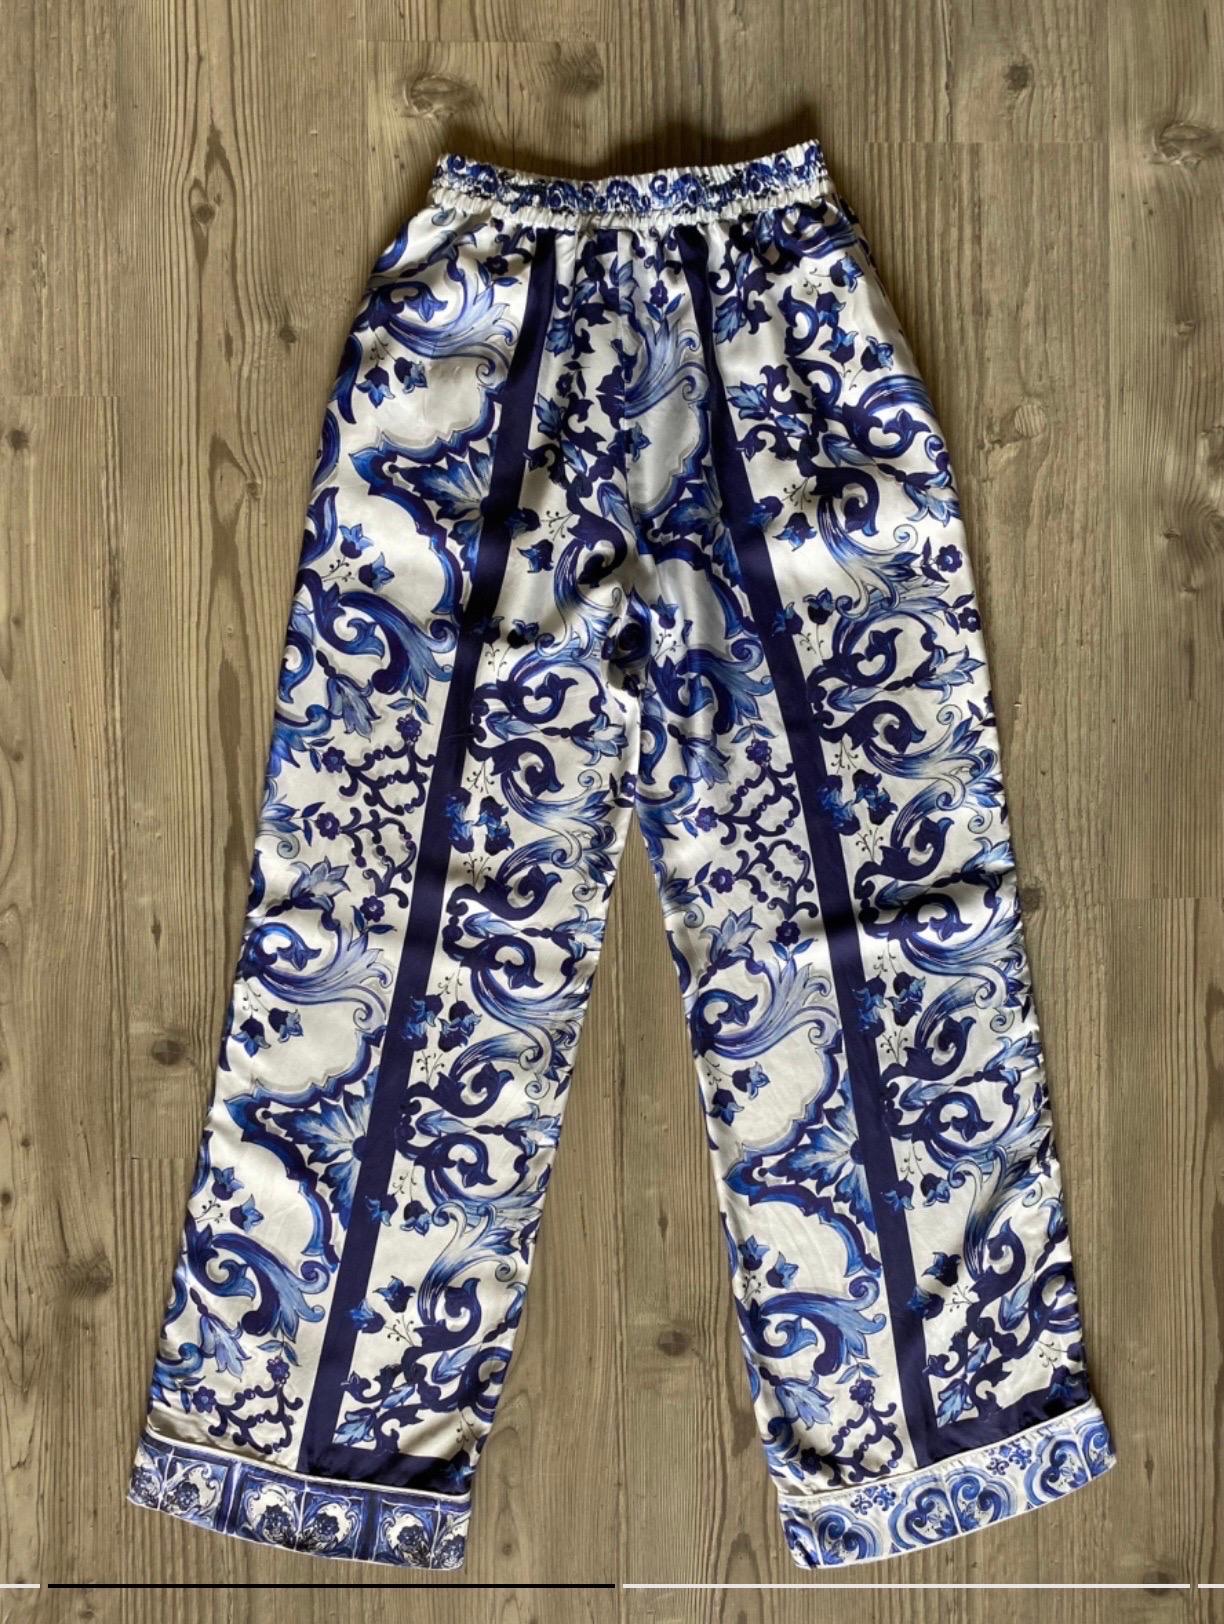 Dolce & Gabbana silk trousers size 40, with majolica print in shades of blue, elastic waist, measurements: waist minimum 30 cm maximum extension 45 cm length 112 cm. new, never used.